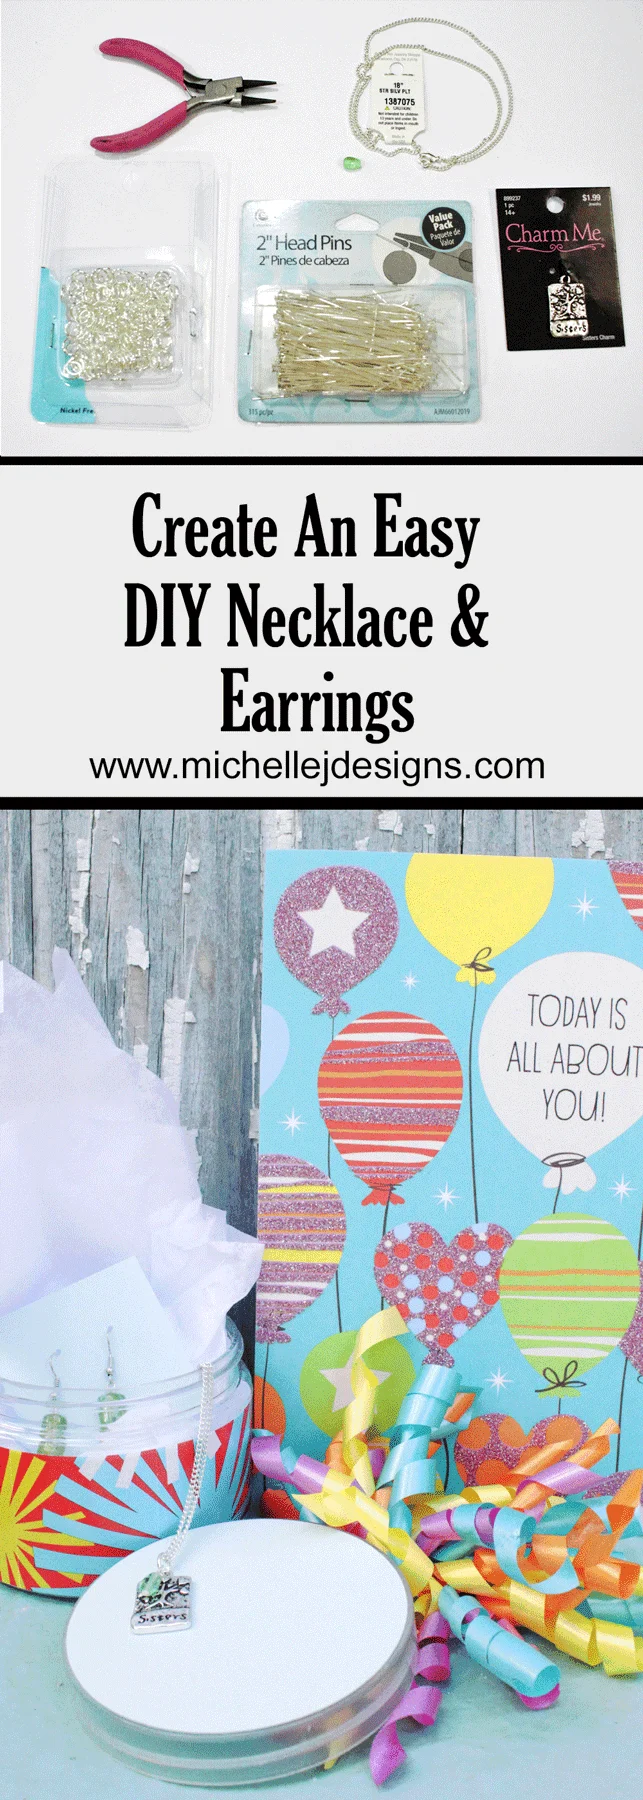 Create the perfect summer birthday gift. Create easy DIY necklace and earrings for someone special! - www.michellejdesigns.com